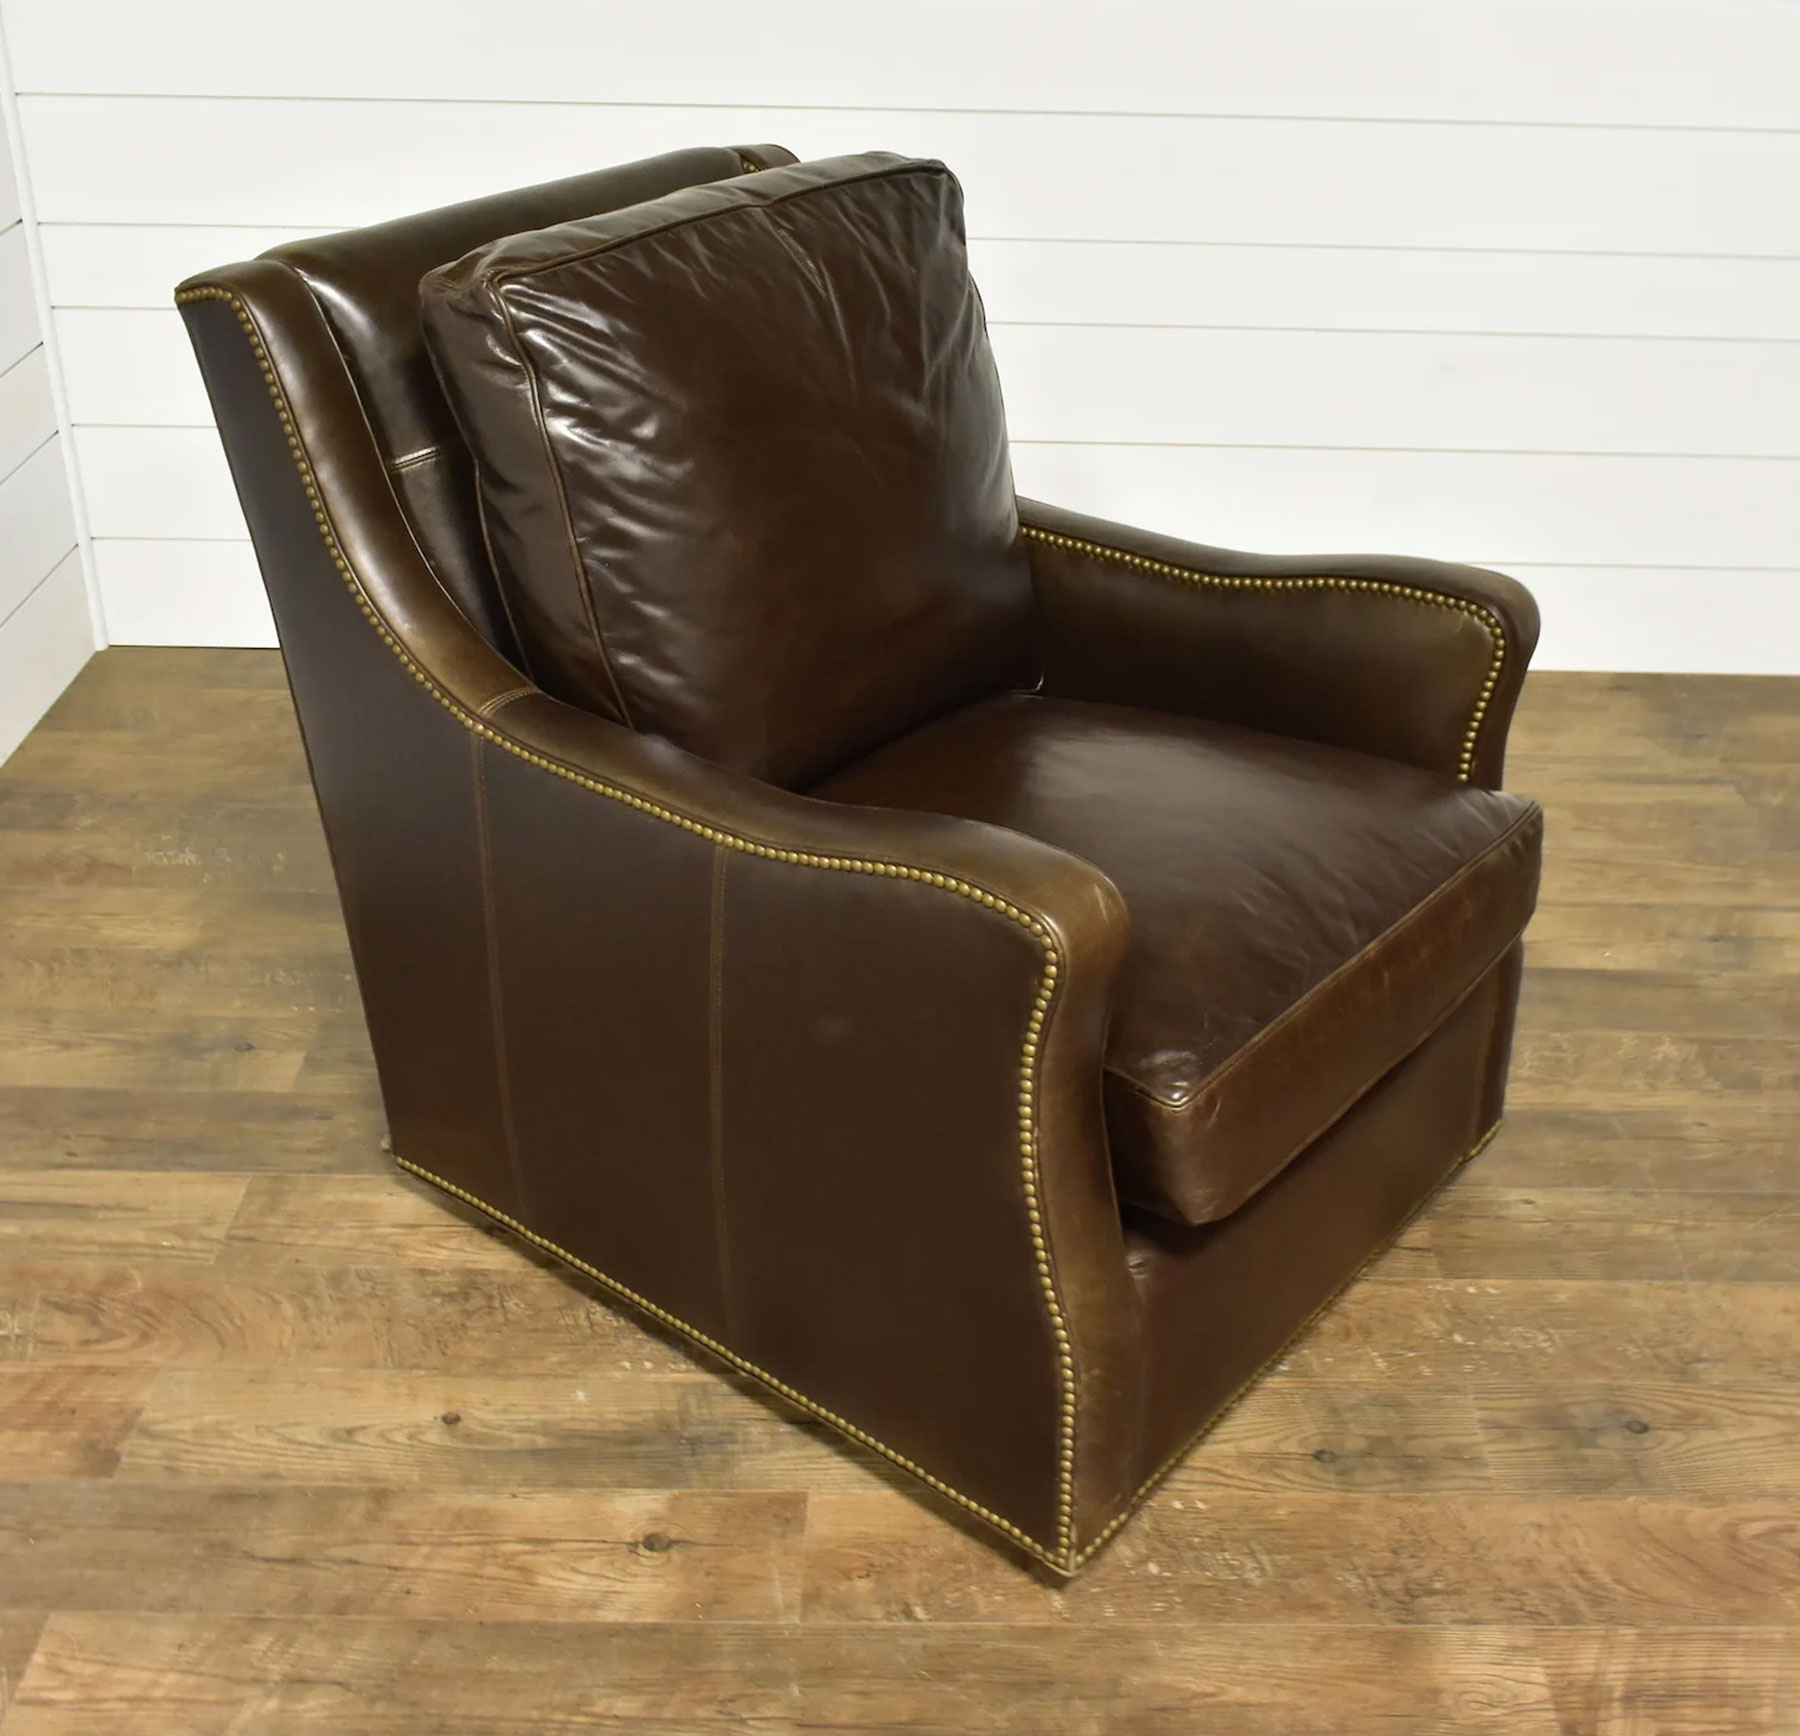 Our House 525 Dowgate Hill Swivel Chair in Java Love Leather